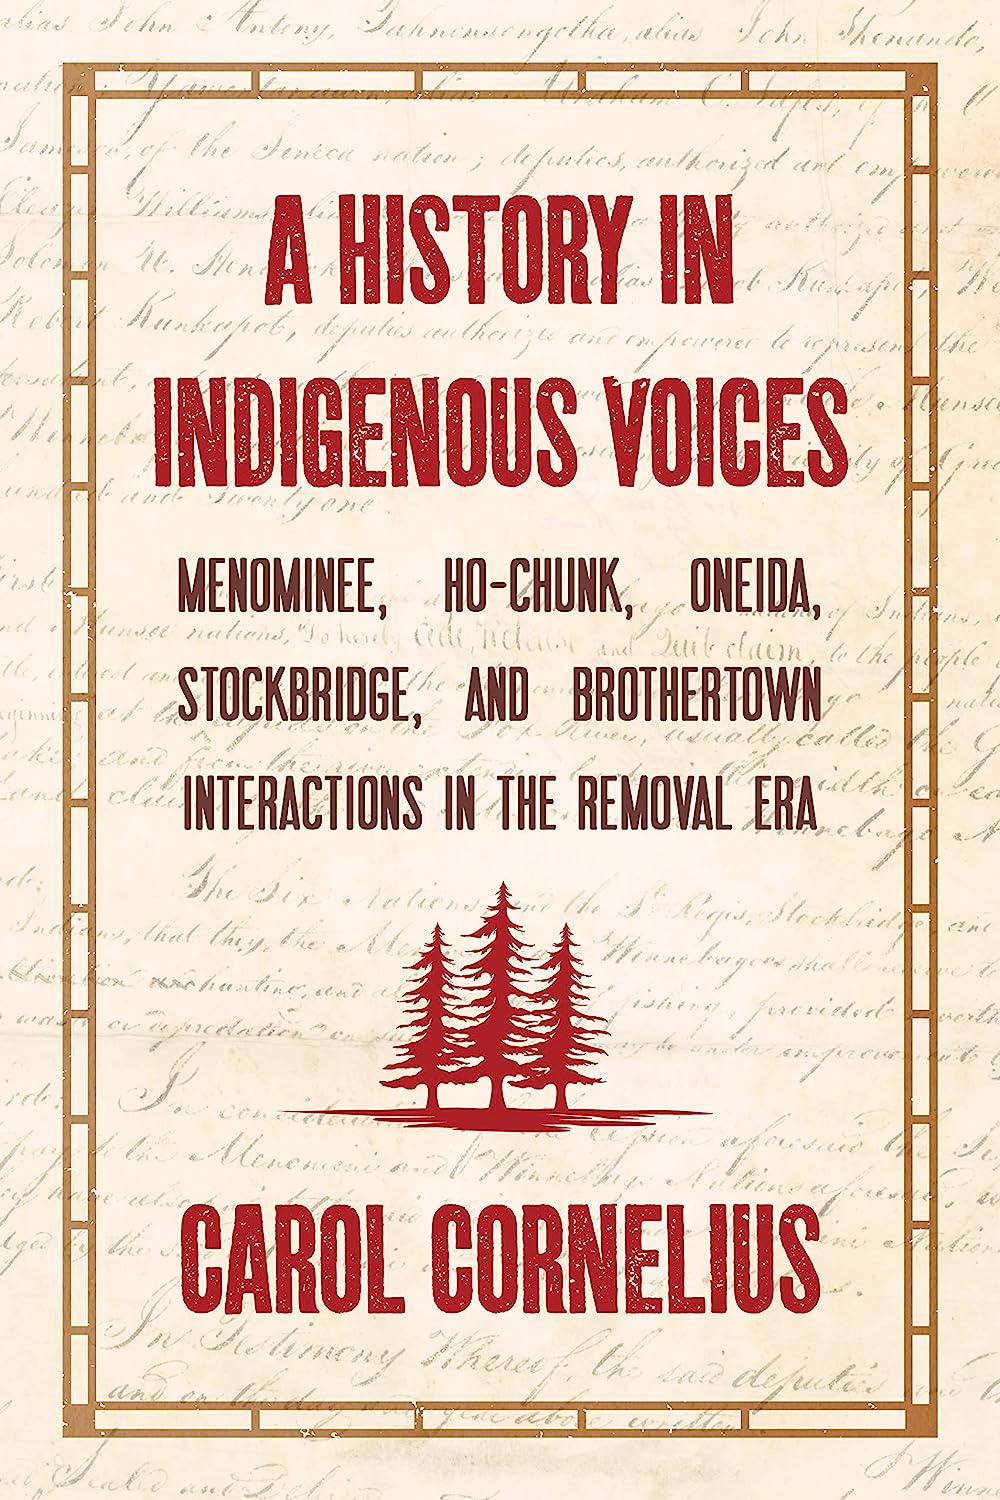 A History in Indigenous Voices by Carol Cornelius